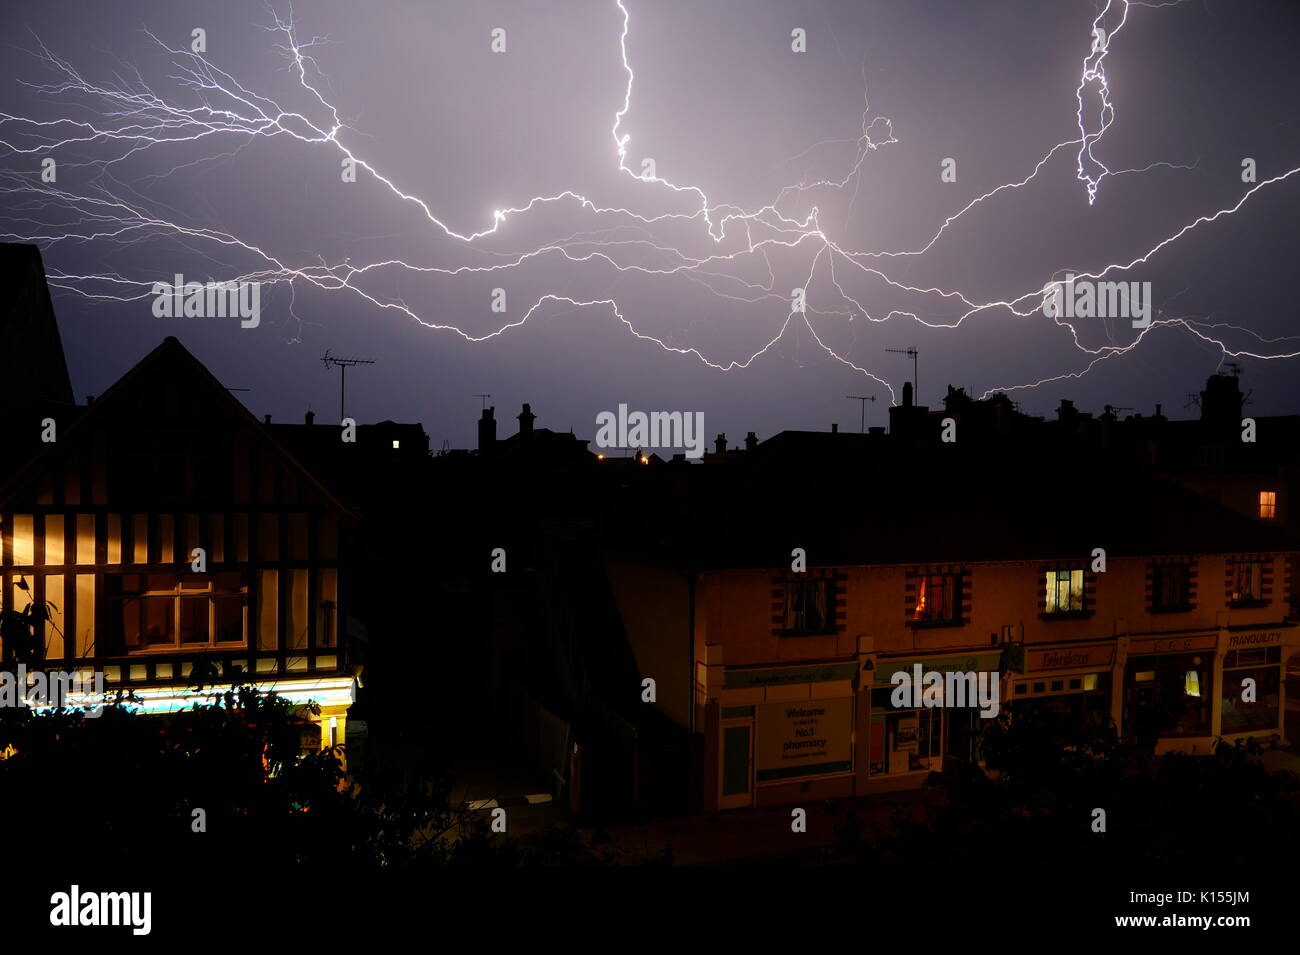 AJAXNETPHOTO. 2017. WORTHING, ENGLAND. - ELECTRICAL STORM - DRAMATIC DISPLAY OF SUMMER STORM LIGHTNING OVER THE TOWN. PHOTO:JONATHAN EASTLAND/AJAX REF:GX8 171907 223 Stock Photo